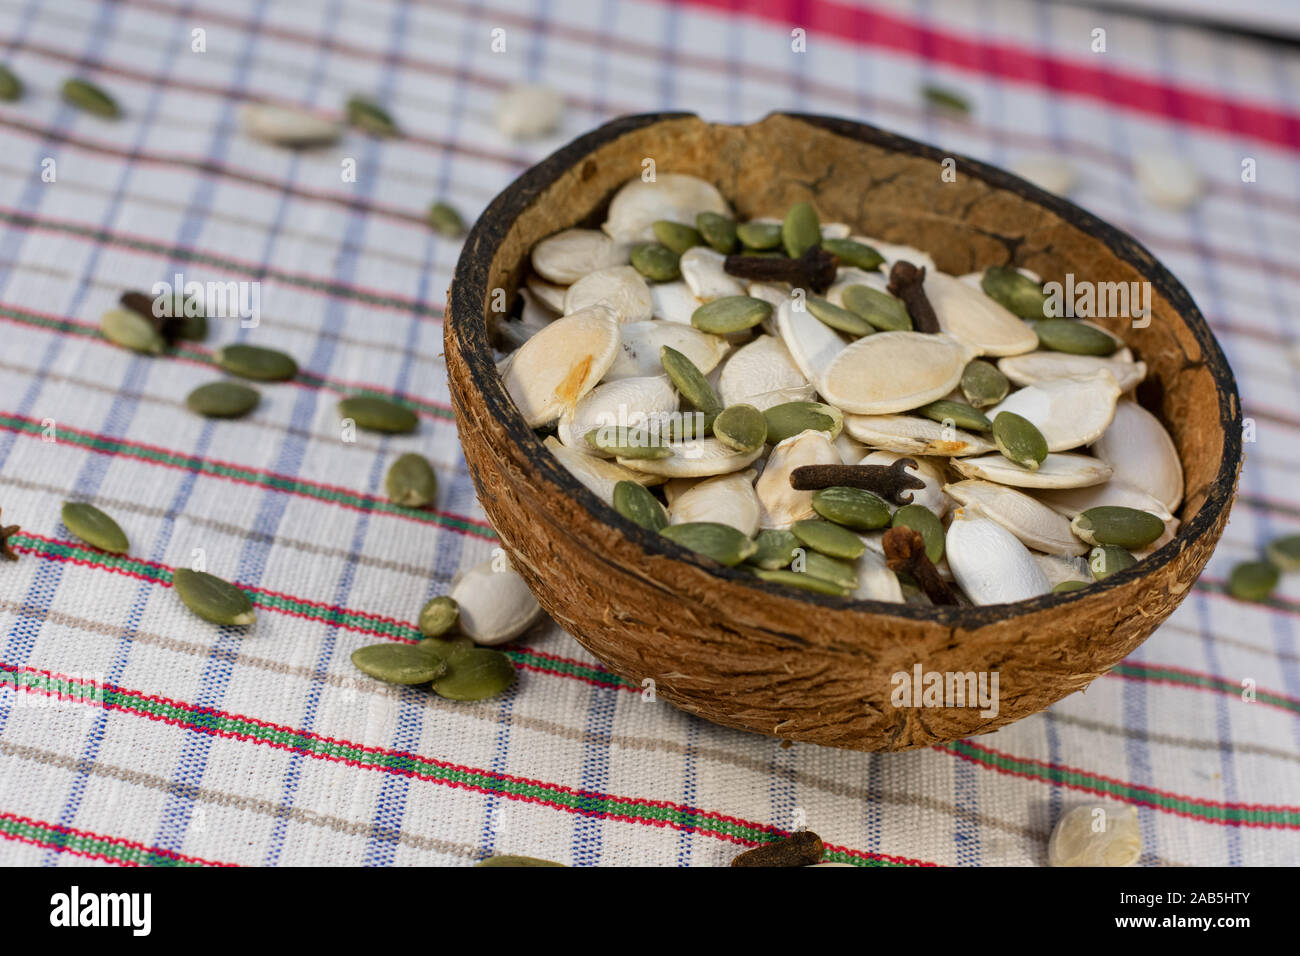 Coconut bowl full of peeled and unpeeled pumpkin seeds in white background with scattered pumpkin seeds and clove spice. Stock Photo